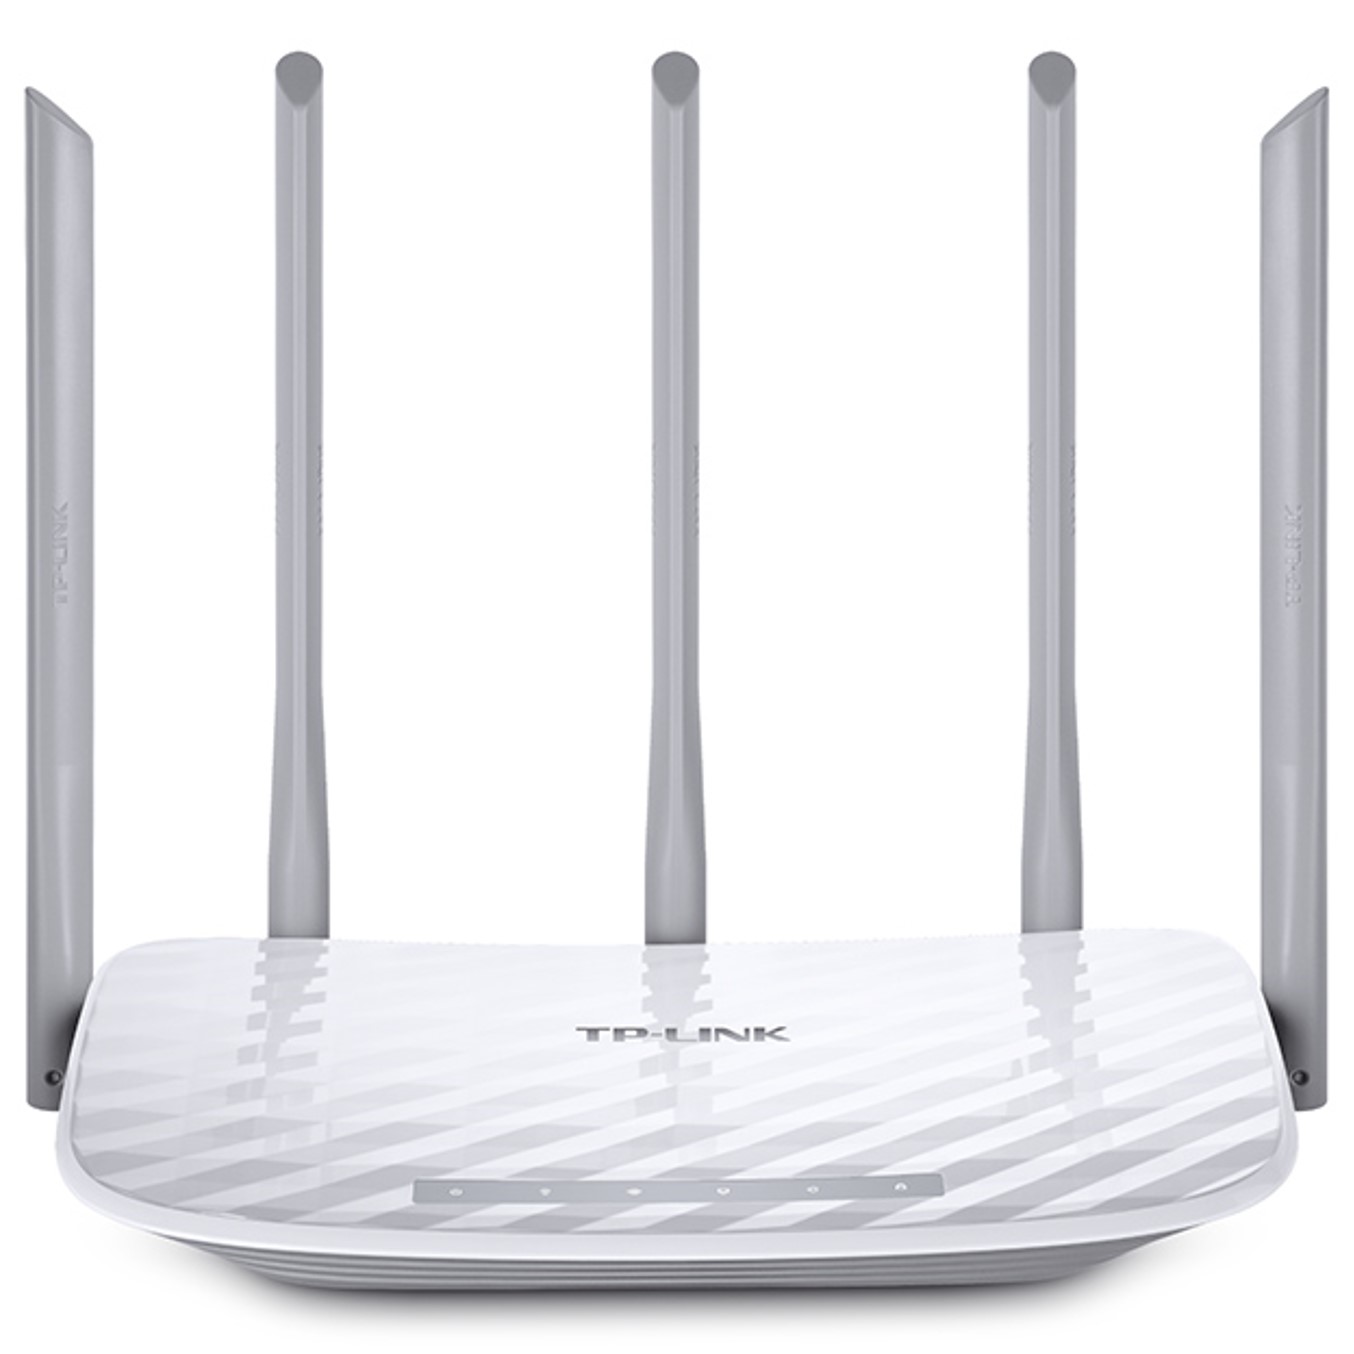 Router wifi archer c60 ac1350 dual band 867mbps tp link